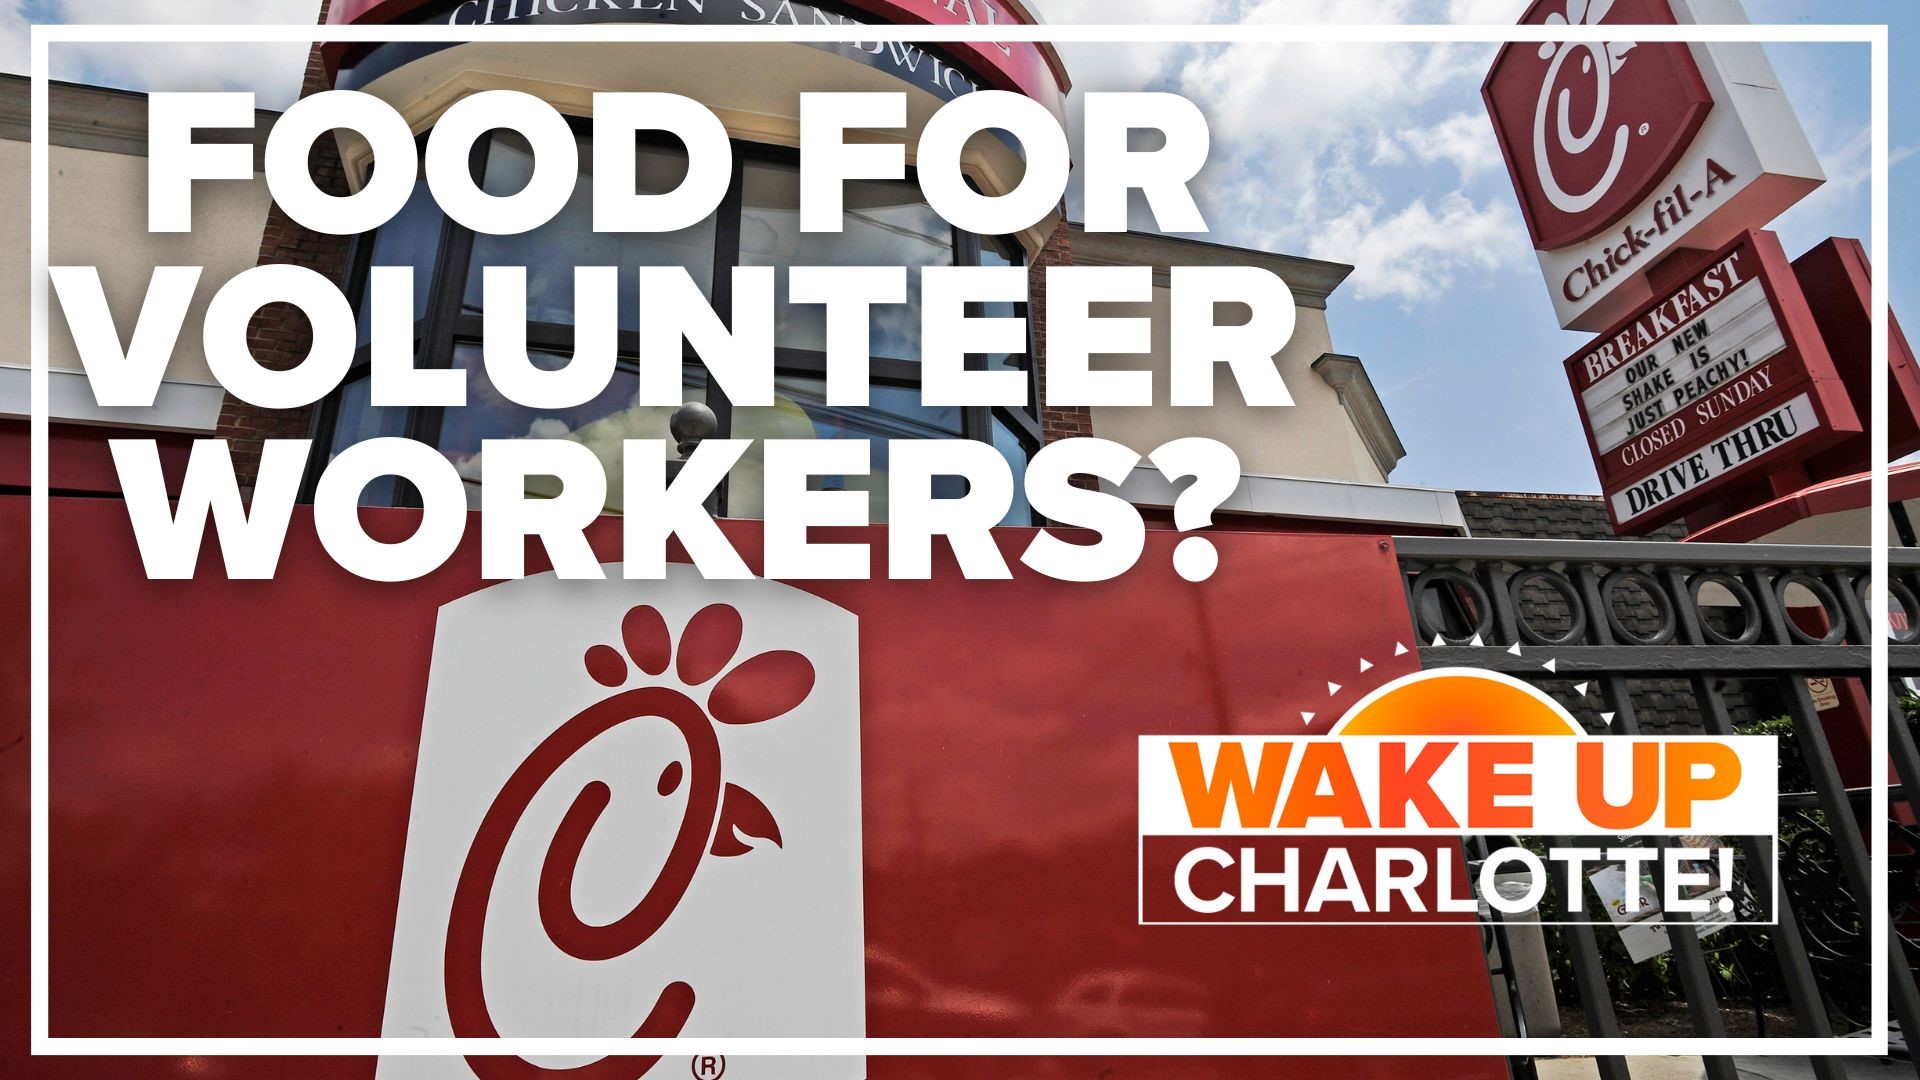 A Chick-fil-A restaurant in Hendersonville was heavily criticized online after a social media post offering to pay volunteer workers with food.